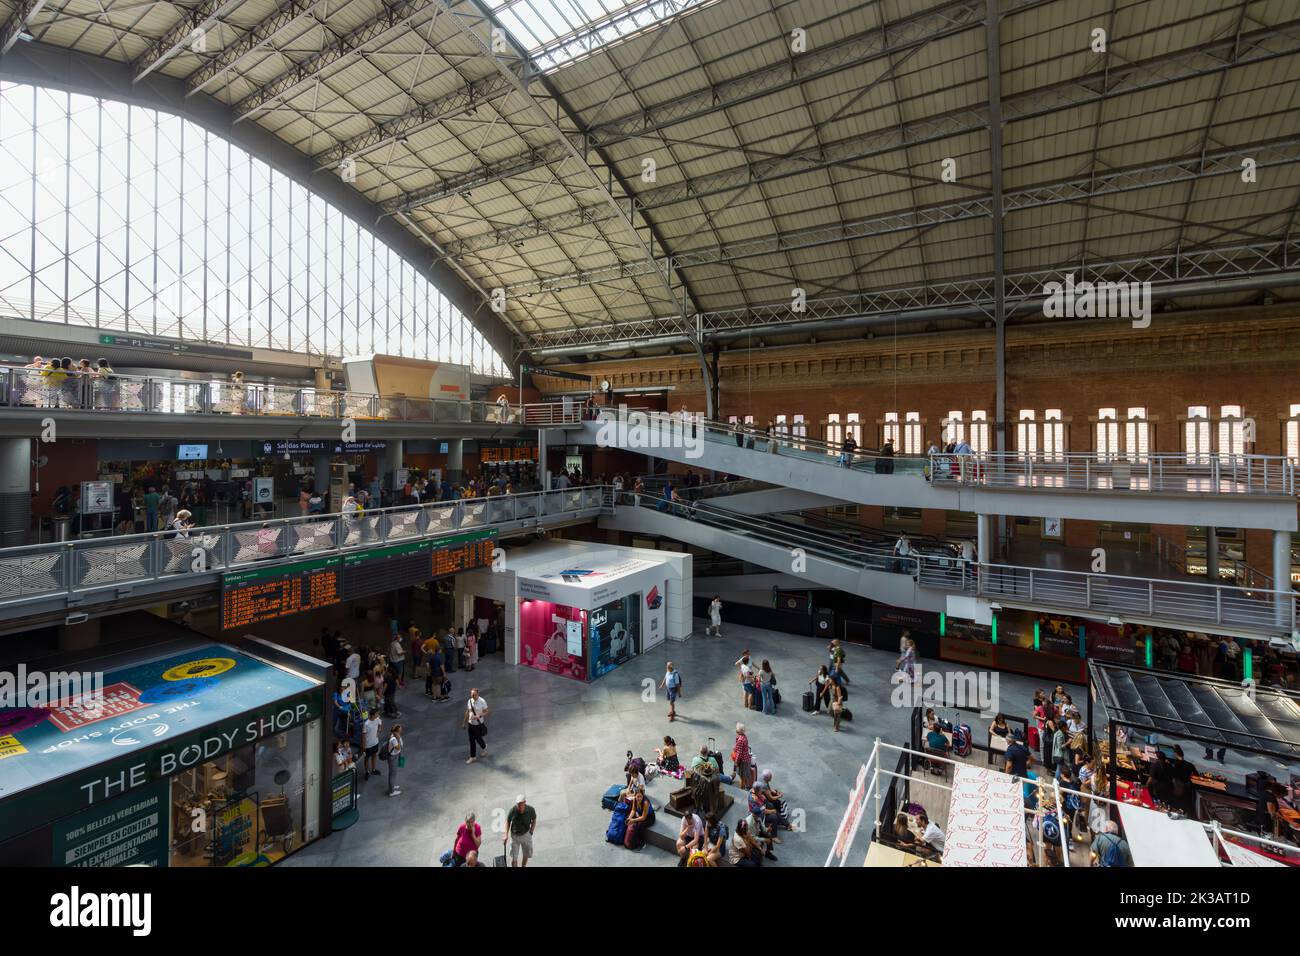 Madrid, Spain, September 2022.  panoramic view of the tropical garden inside the Atocha railway station in the city center Stock Photo